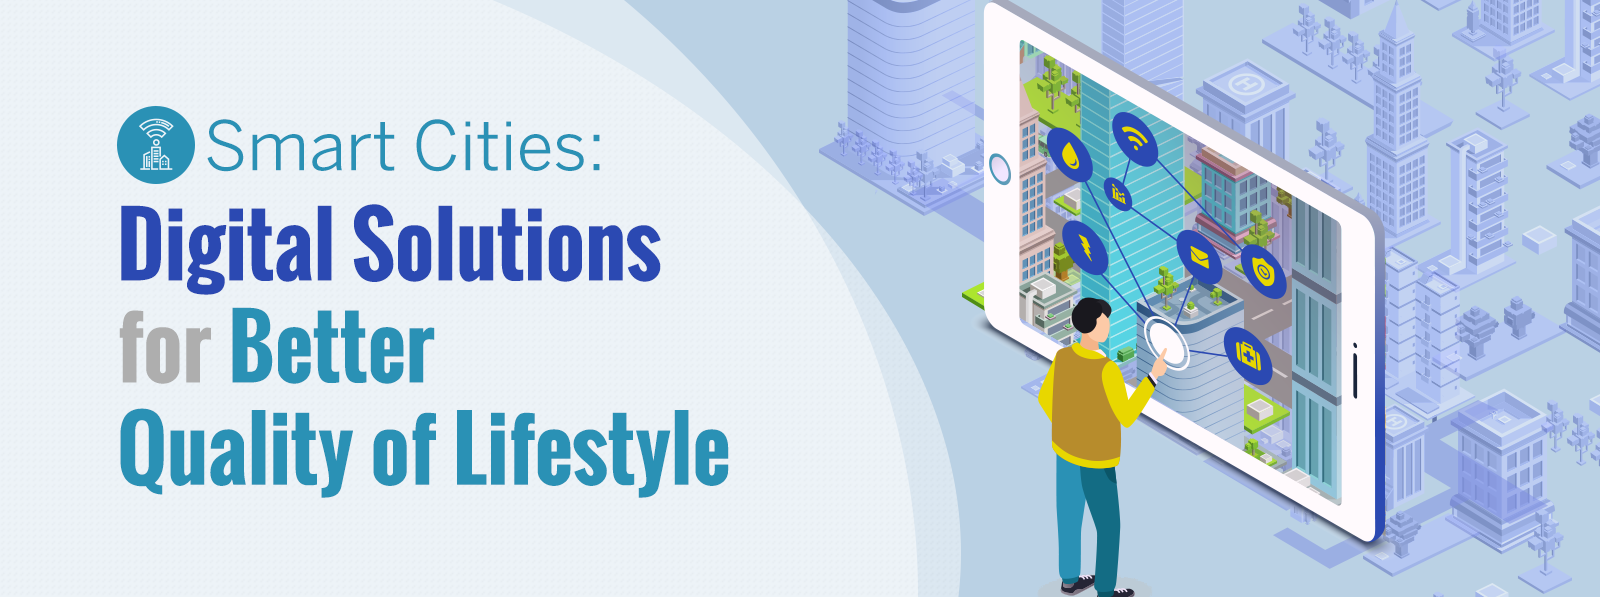 smart cities digital solutions for better quality of lifestyle